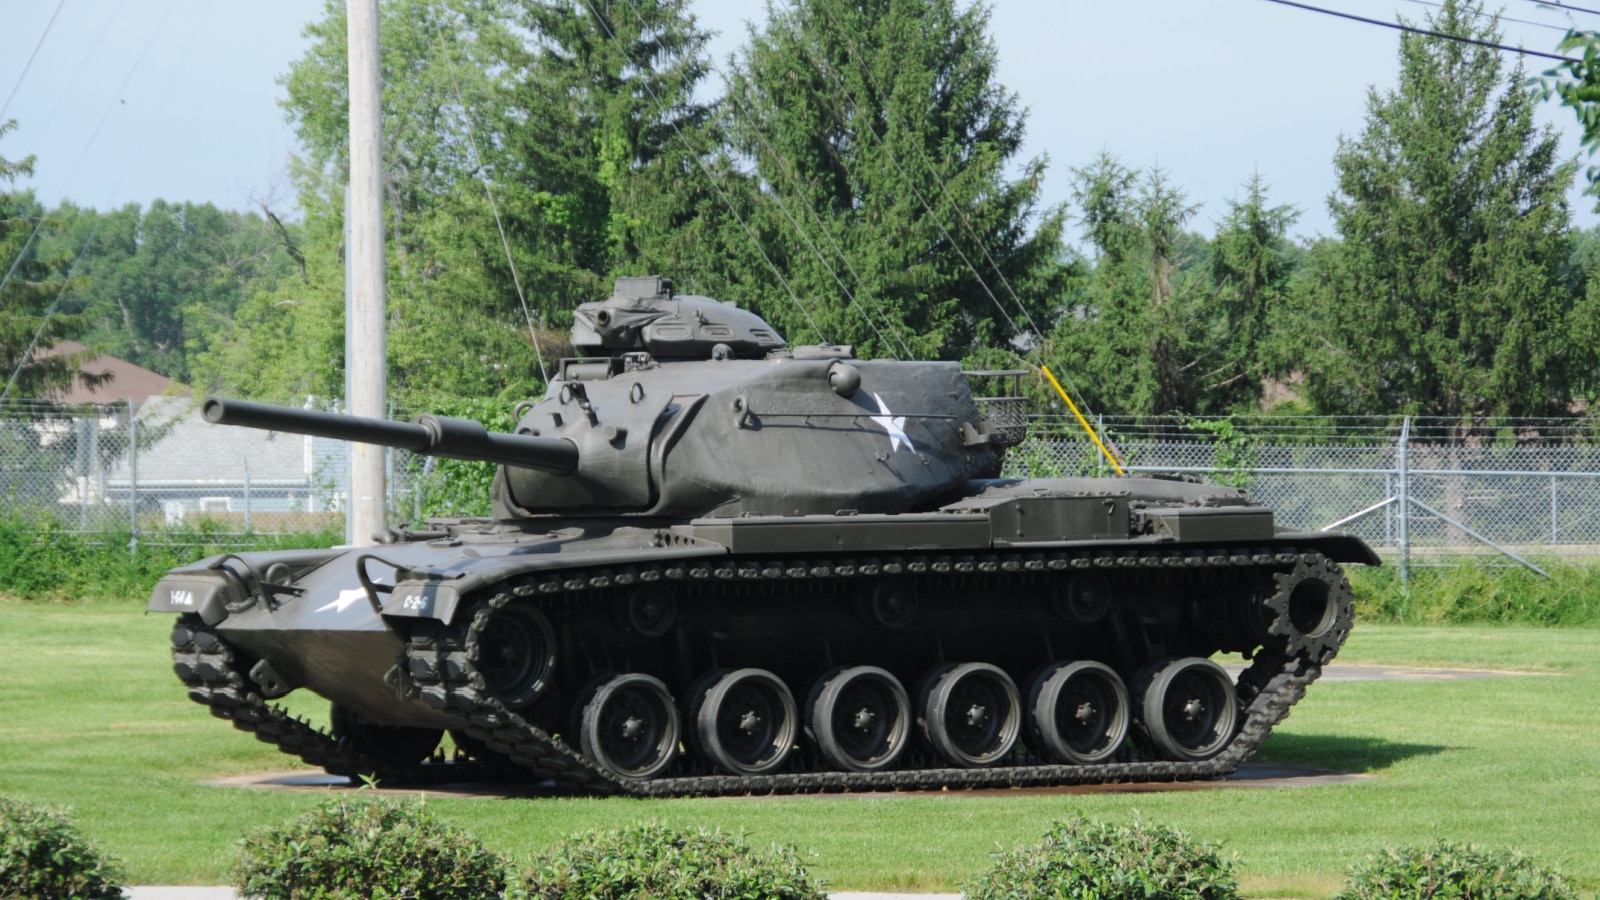 May 27, 2016, Fort Knox, KY, M60 Patton tank on display outside of the George Patton Museum